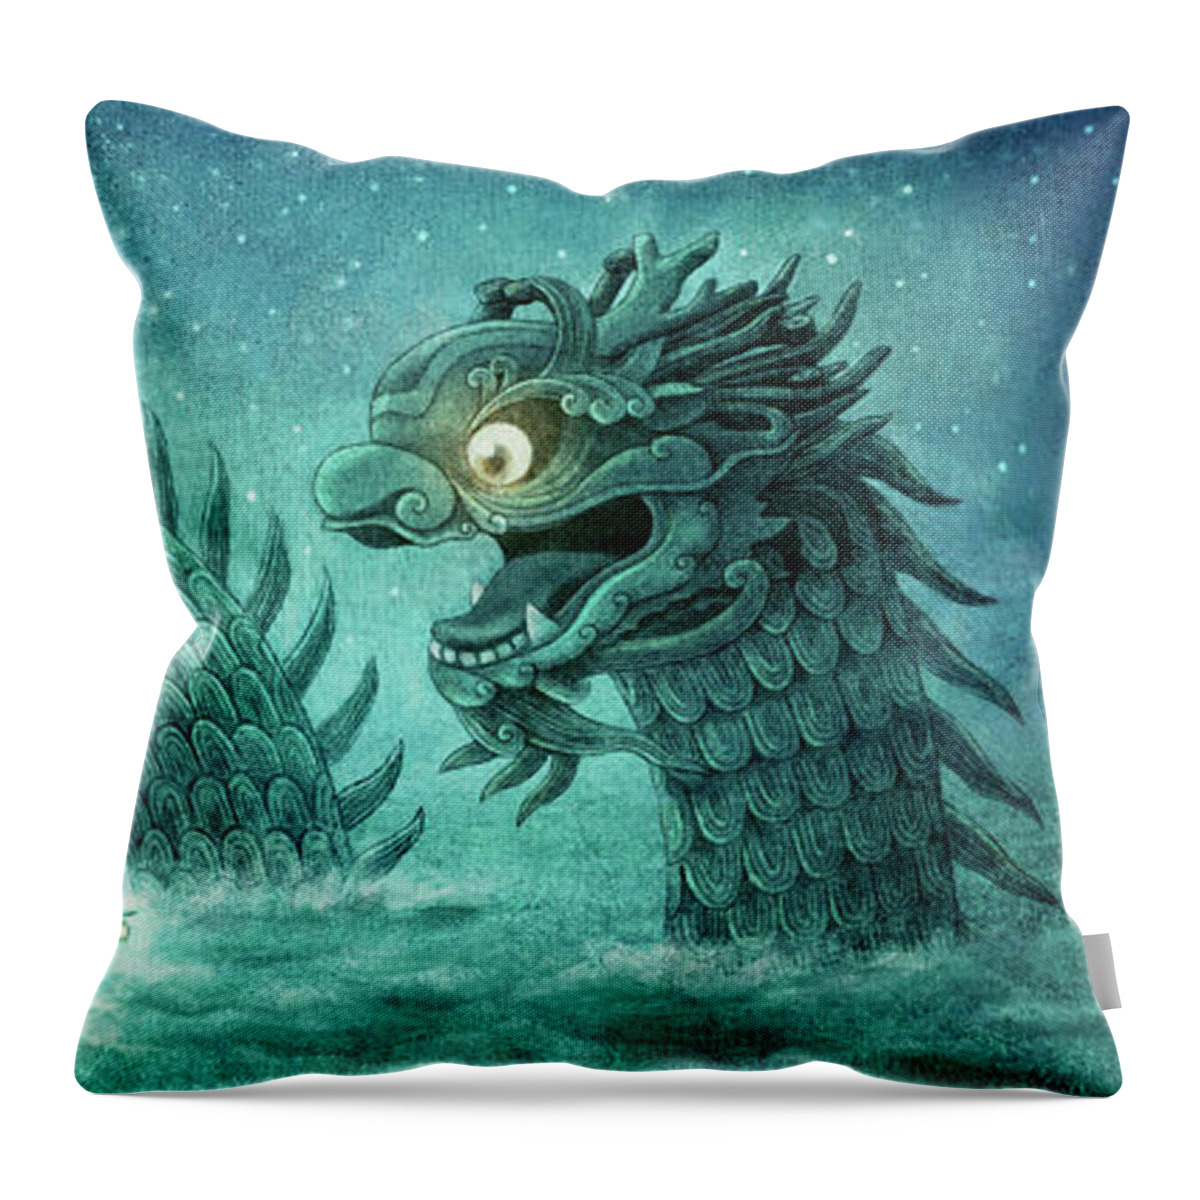 Dragon Throw Pillow featuring the drawing The Dumpling Dragon by Eric Fan